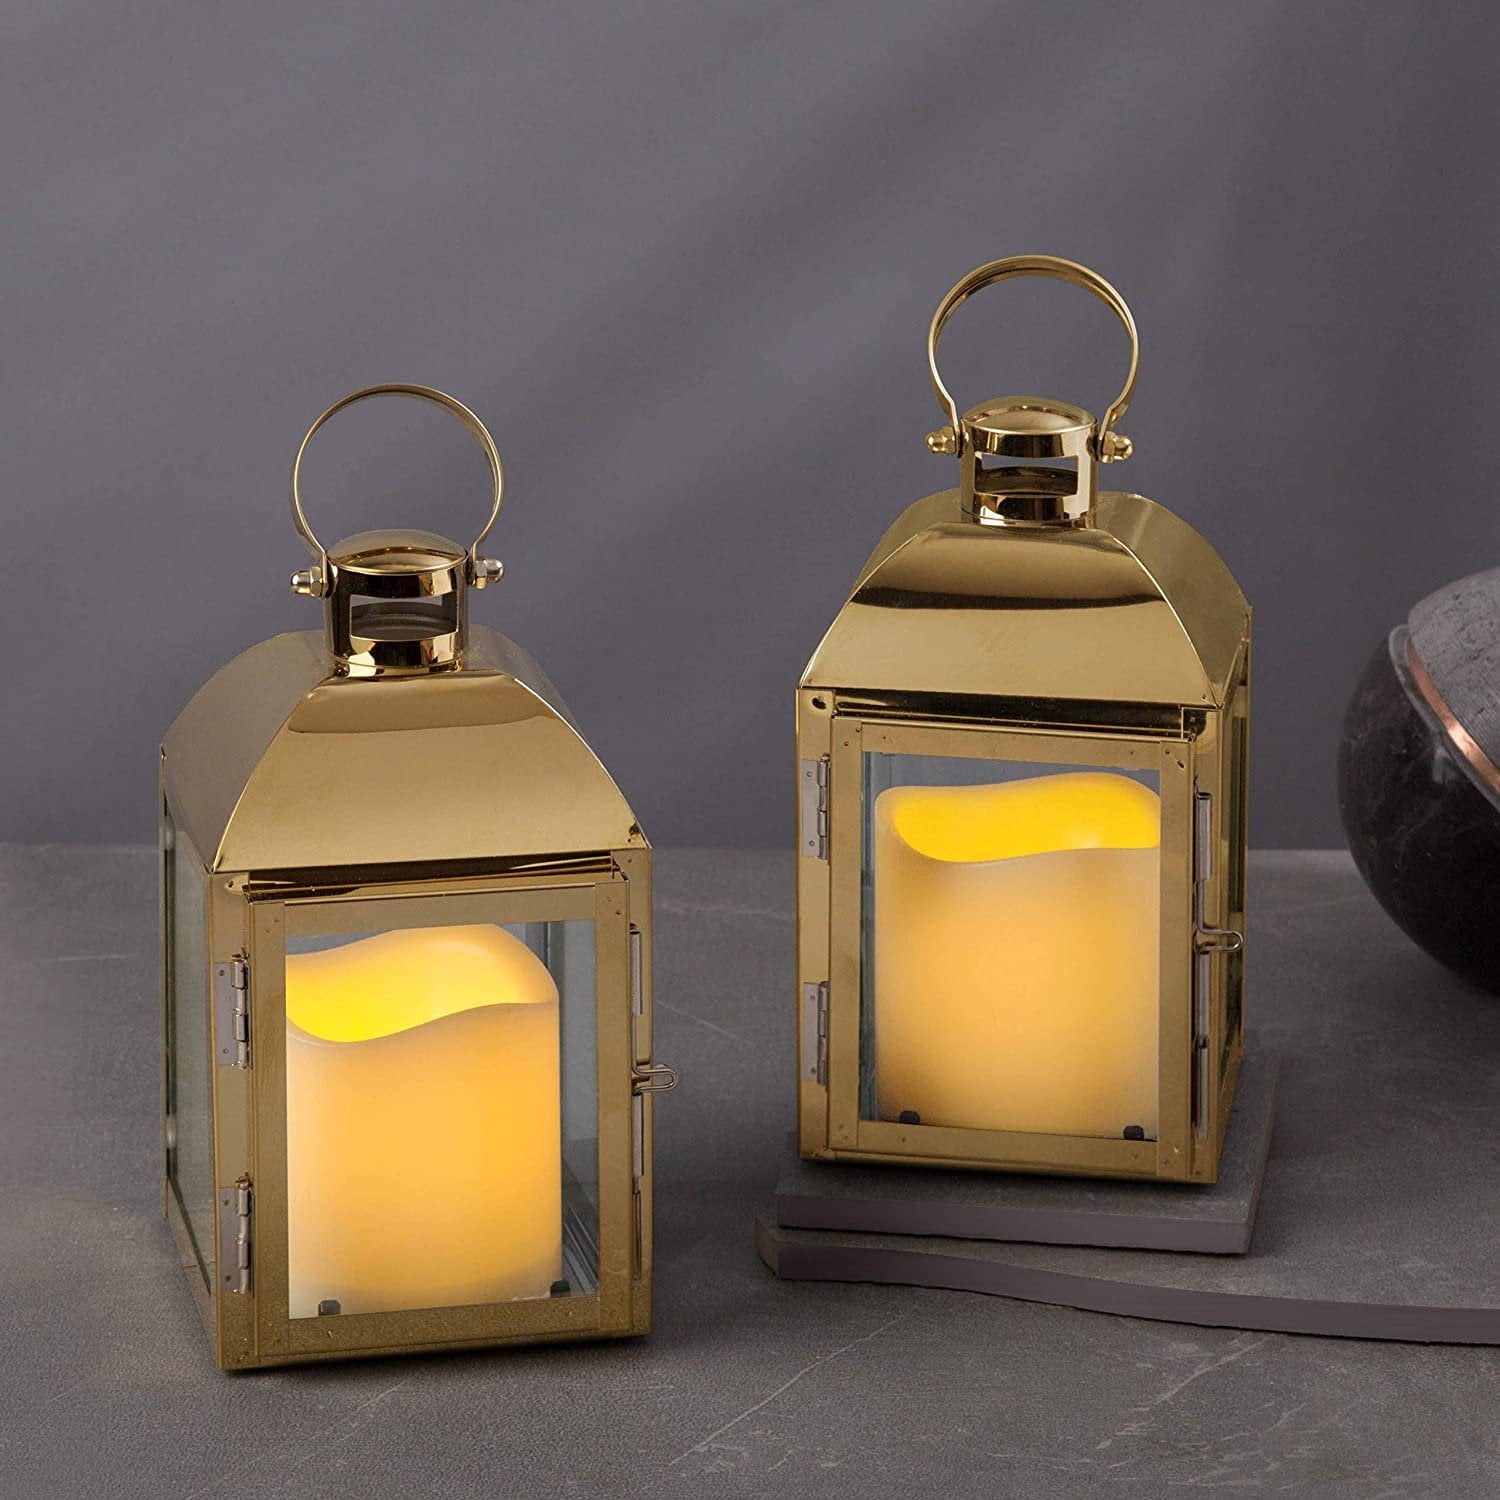 Decorative Lanterns,Battery Operated Hanging LED Lantern with 6 Hours Timer Cand 